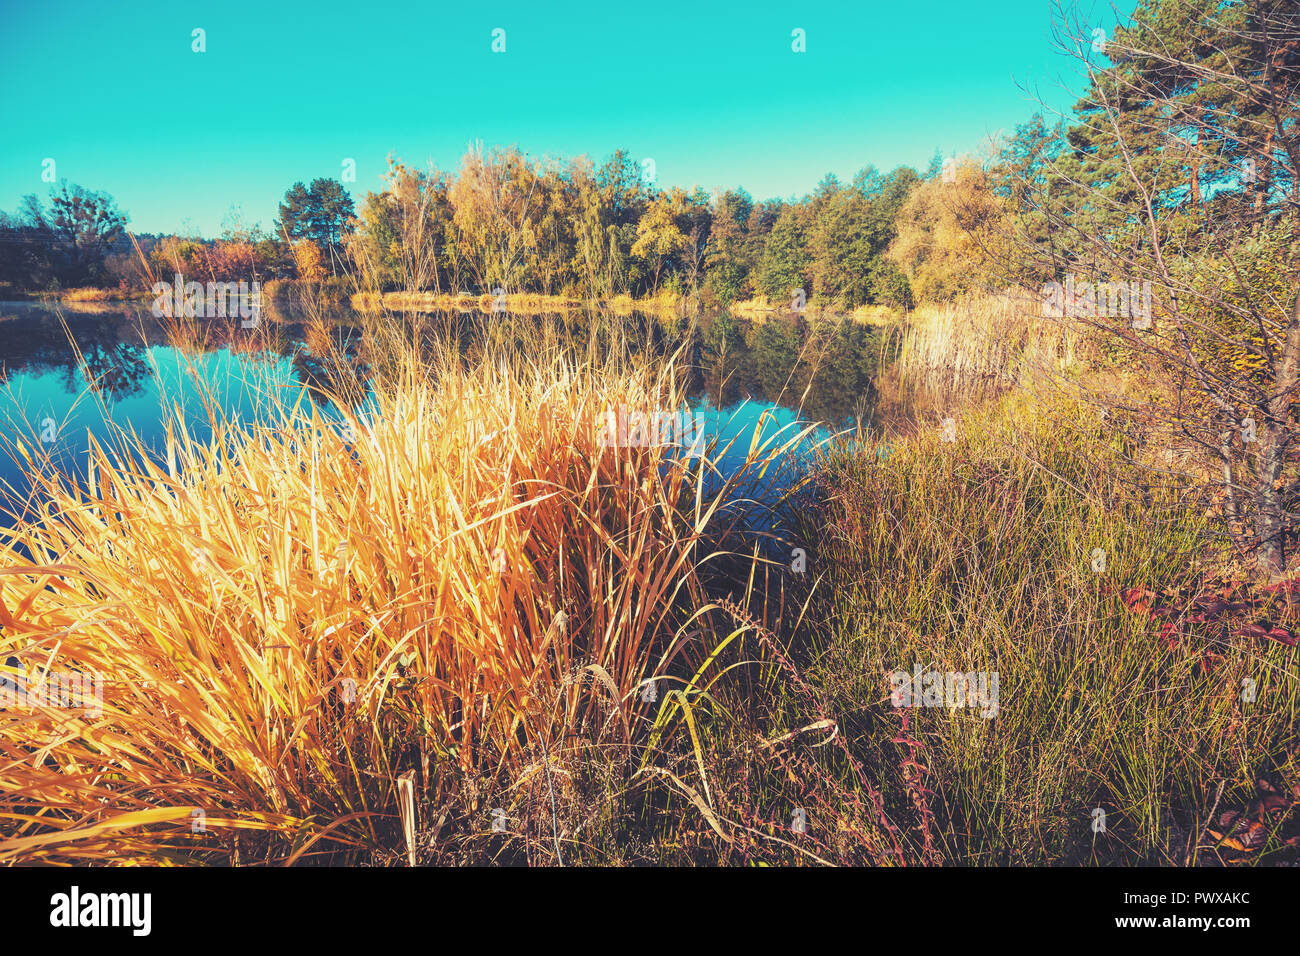 At understrege tand sjæl Wild Nature High Resolution Stock Photography and Images - Alamy